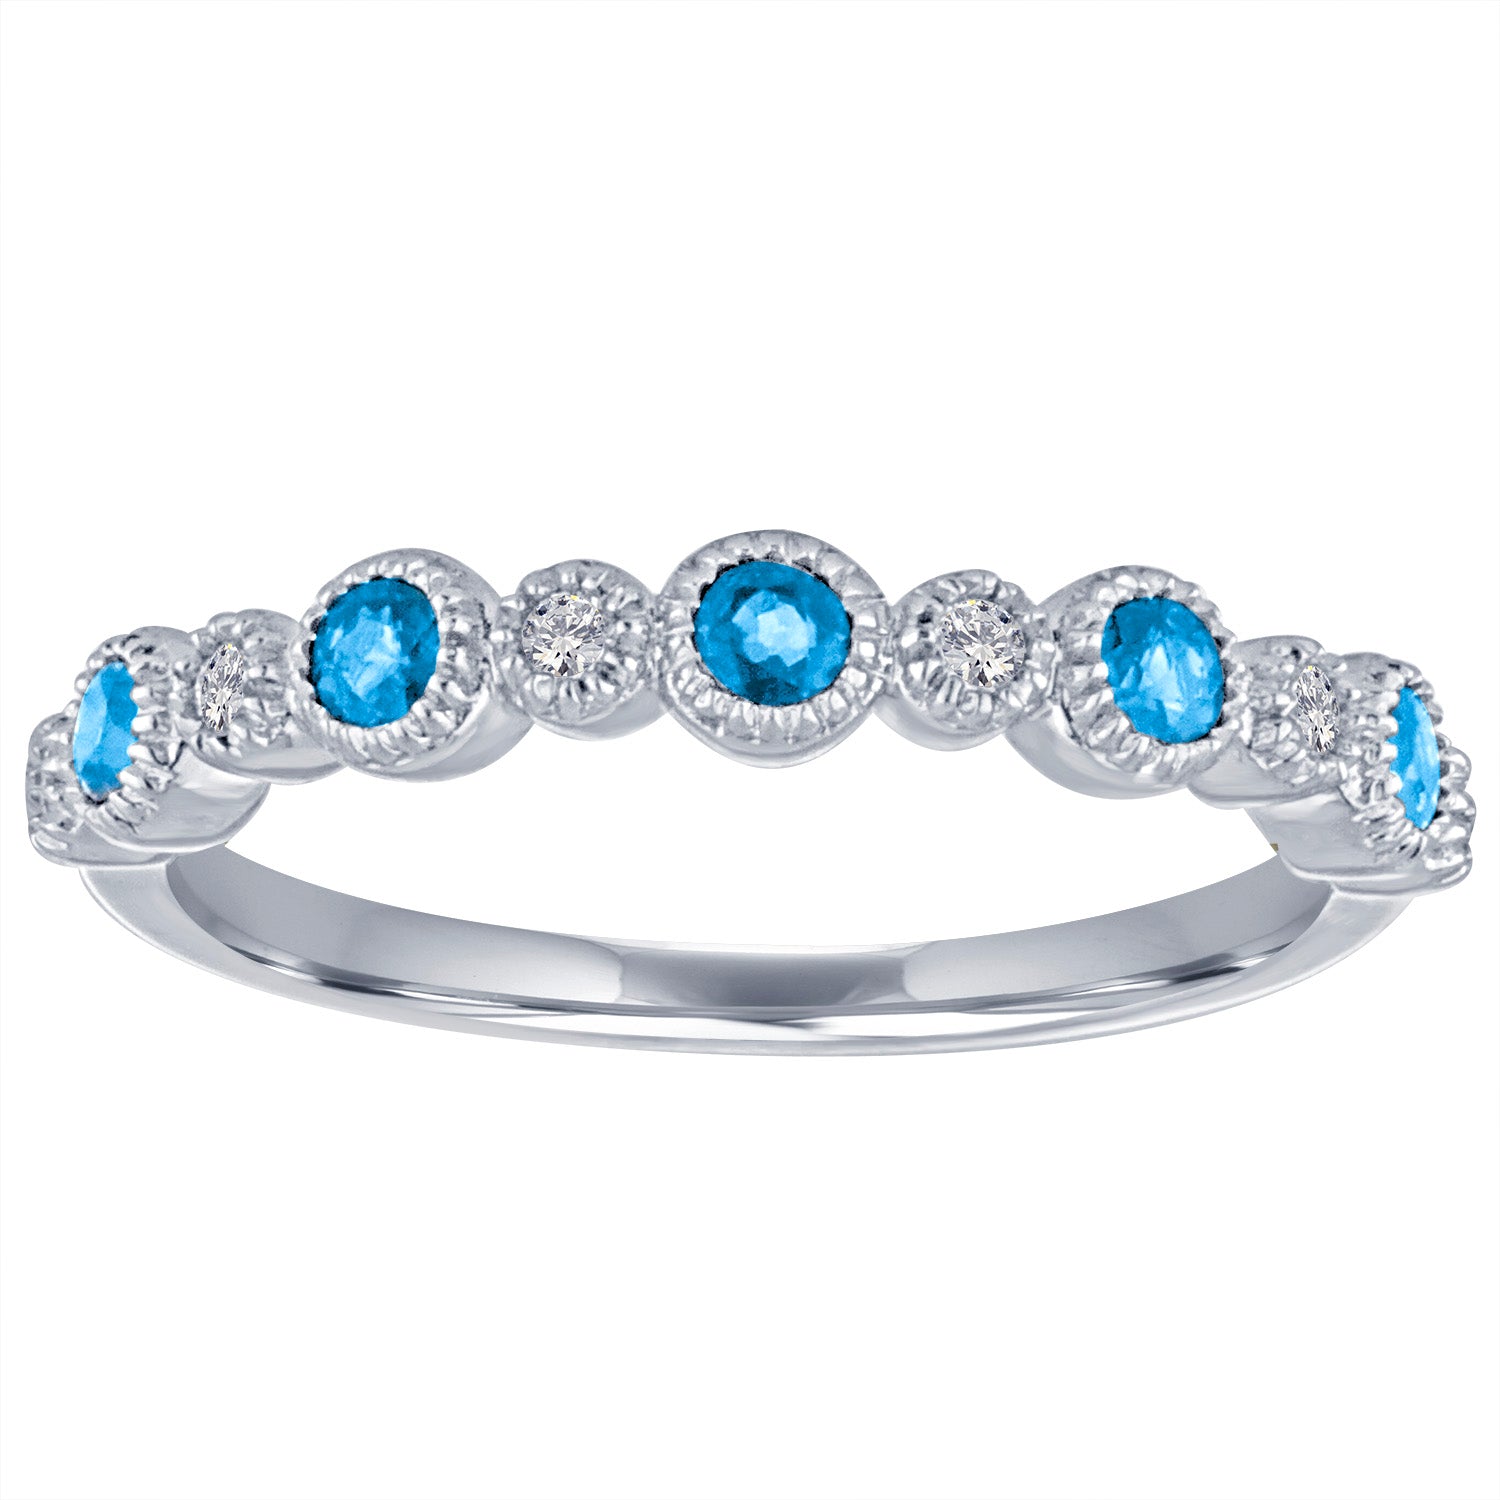 White gold skinny band with large round blue topaz's and small round diamonds.